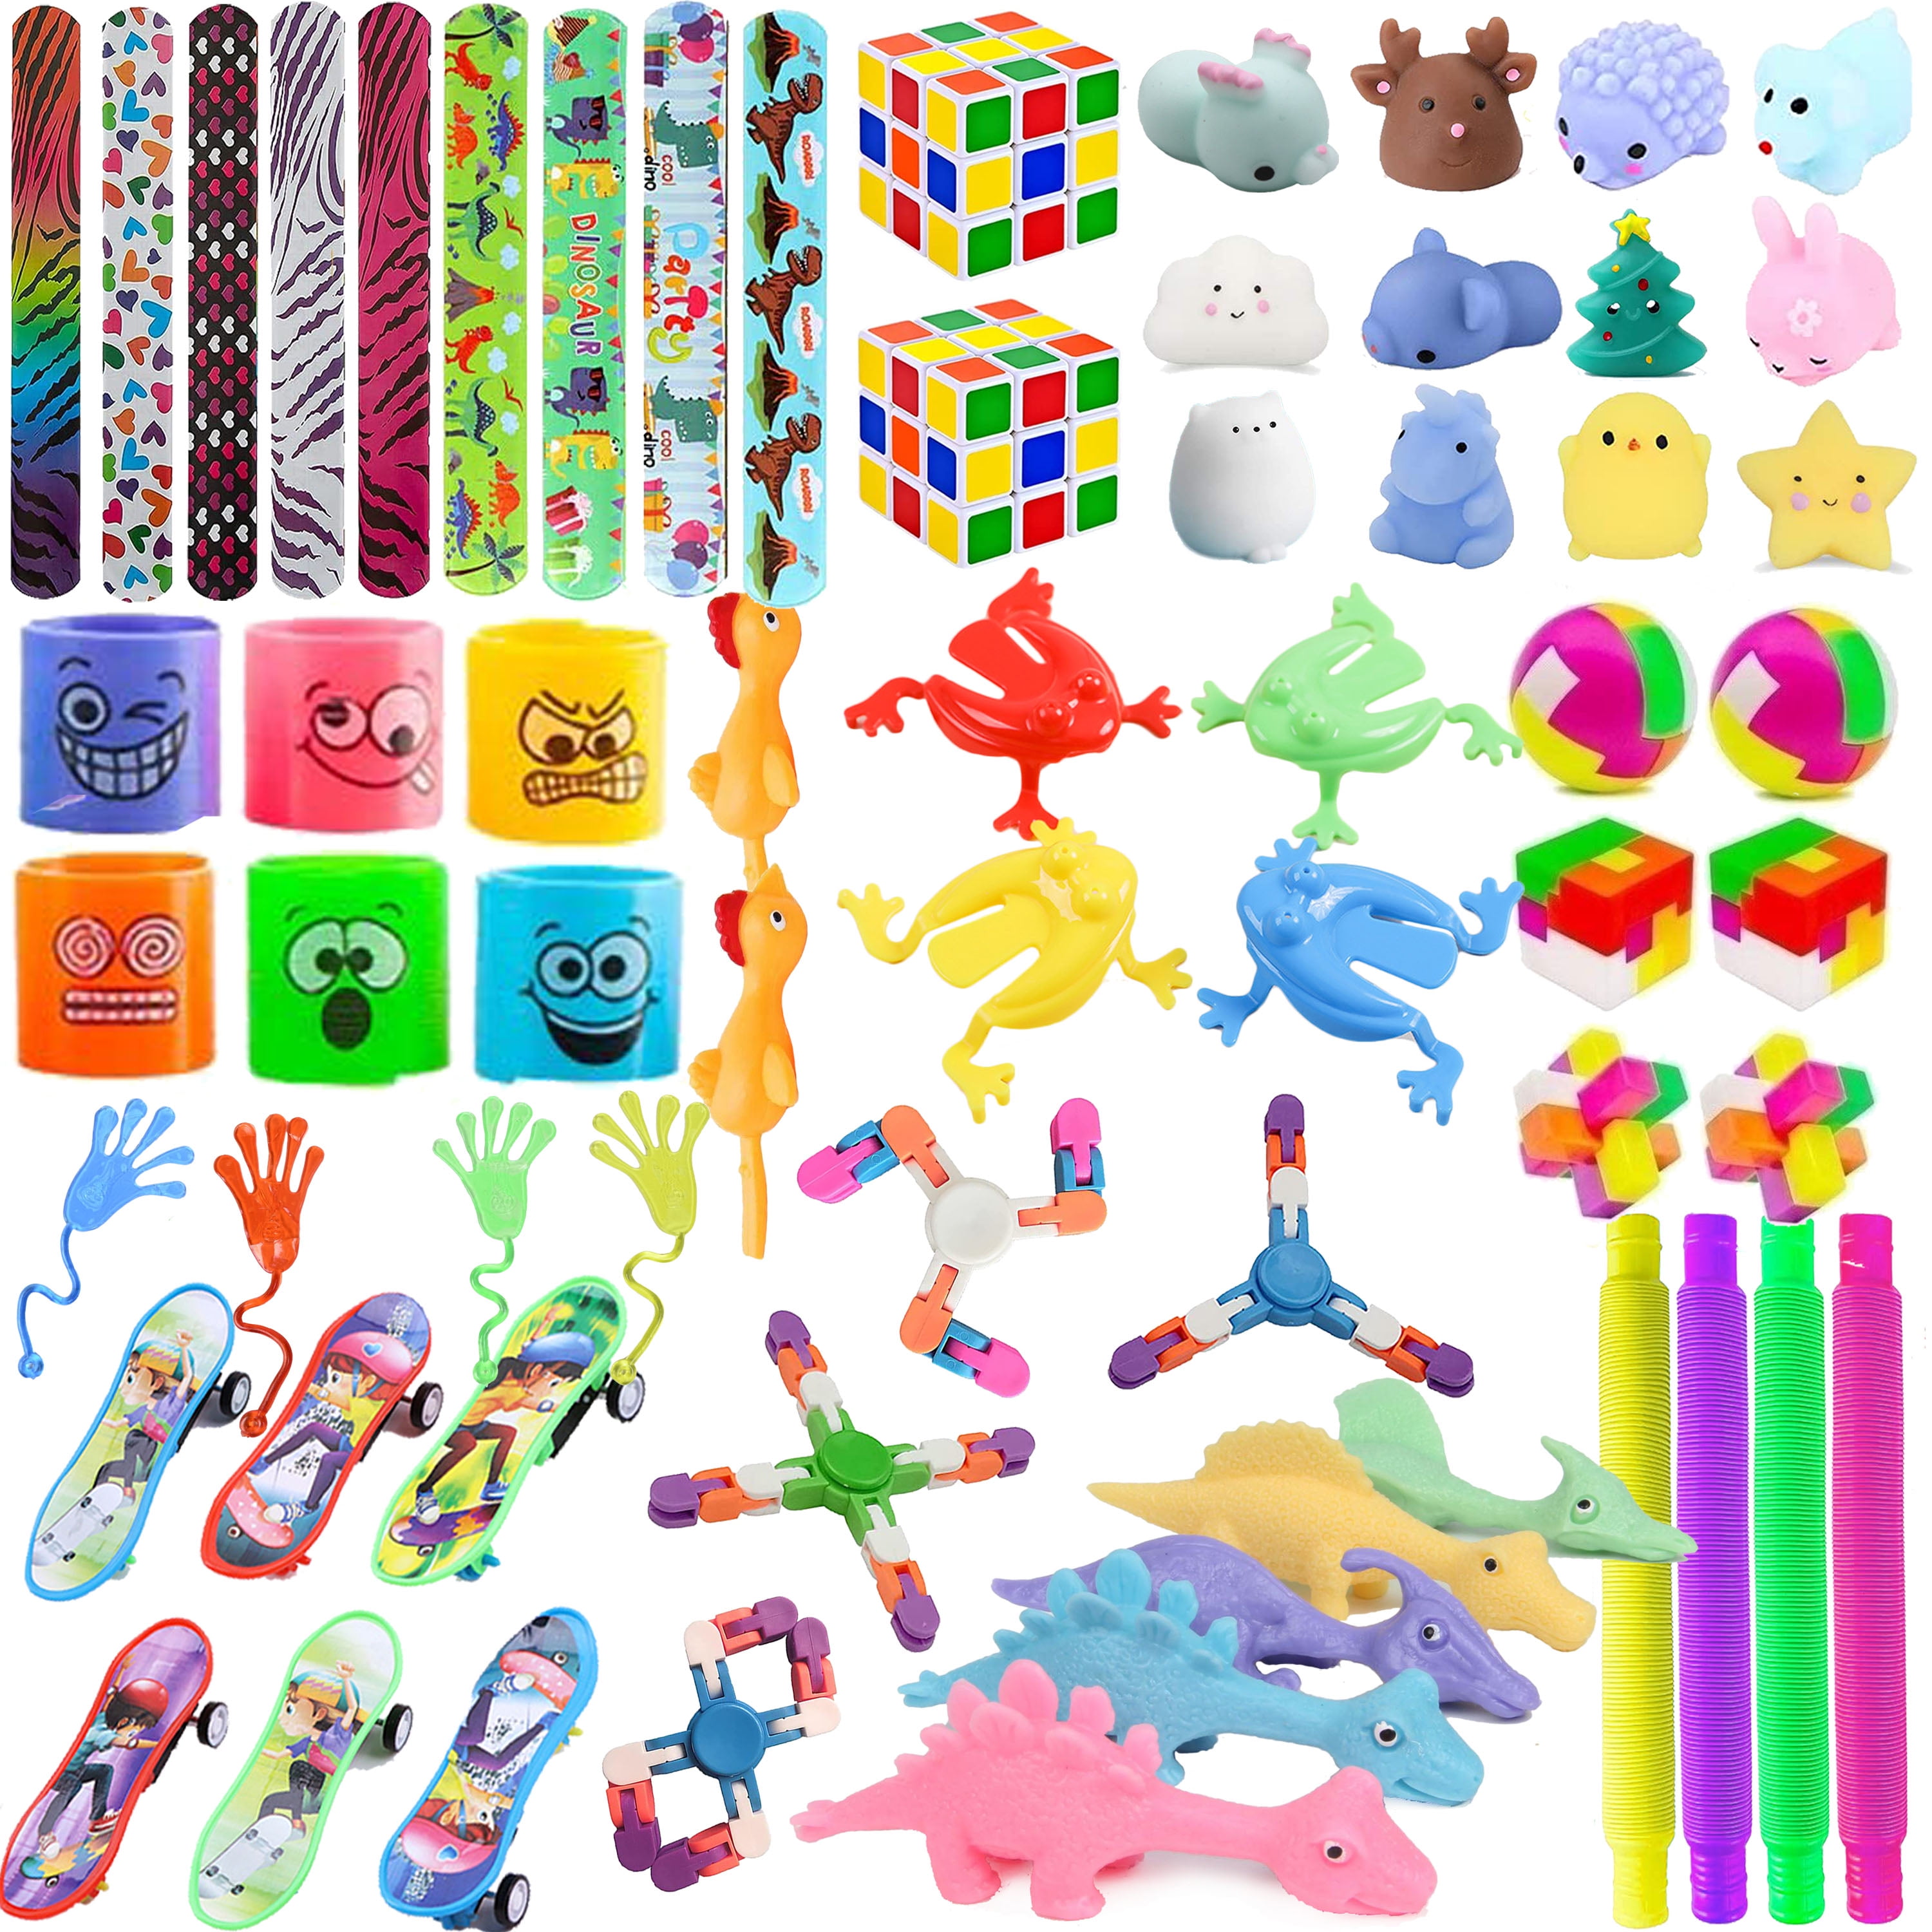  ArtCreativity Space Sticker Assortment, 100 Sticker Sheets of  Assorted Space Themed Stickers, Kids' Arts and Crafts Supplies, Great  Birthday Party Favors, Goodie Bag Fillers for Kids : Toys & Games